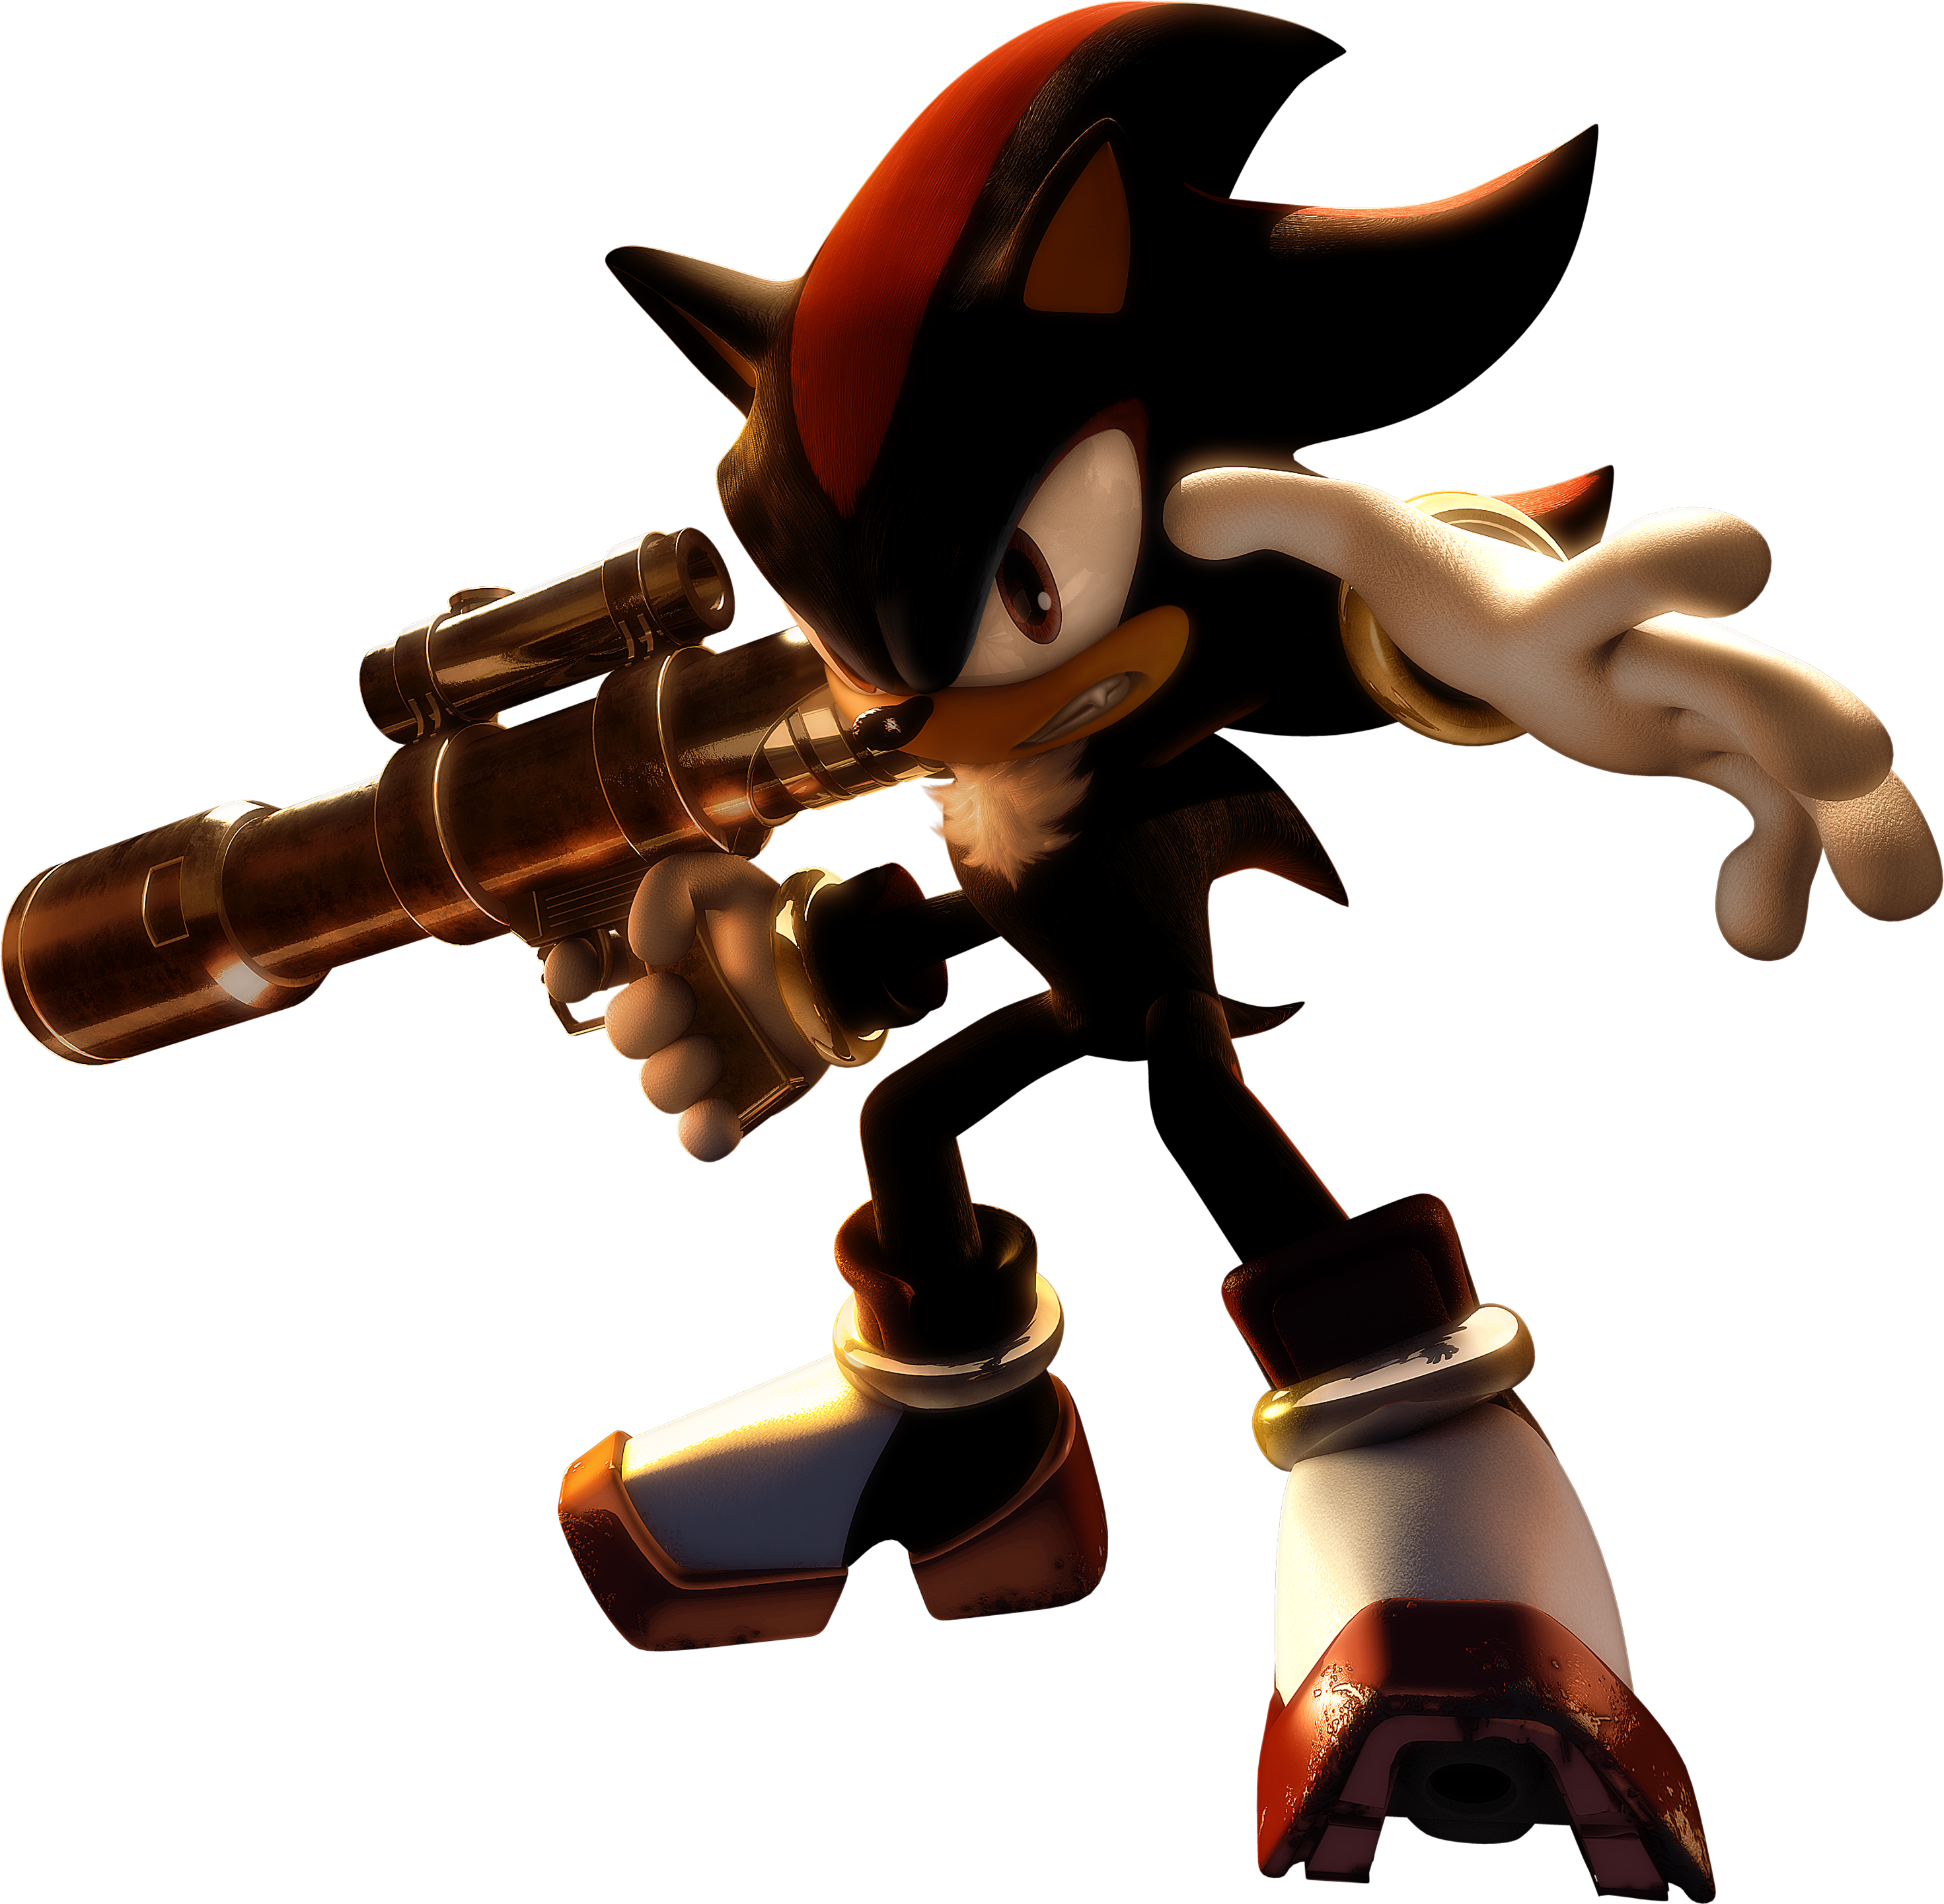 Shadow Is Here By Dry-rowseroopa - Gun Shadow The Hedgehog, clipart,  transparent, png, images, Download